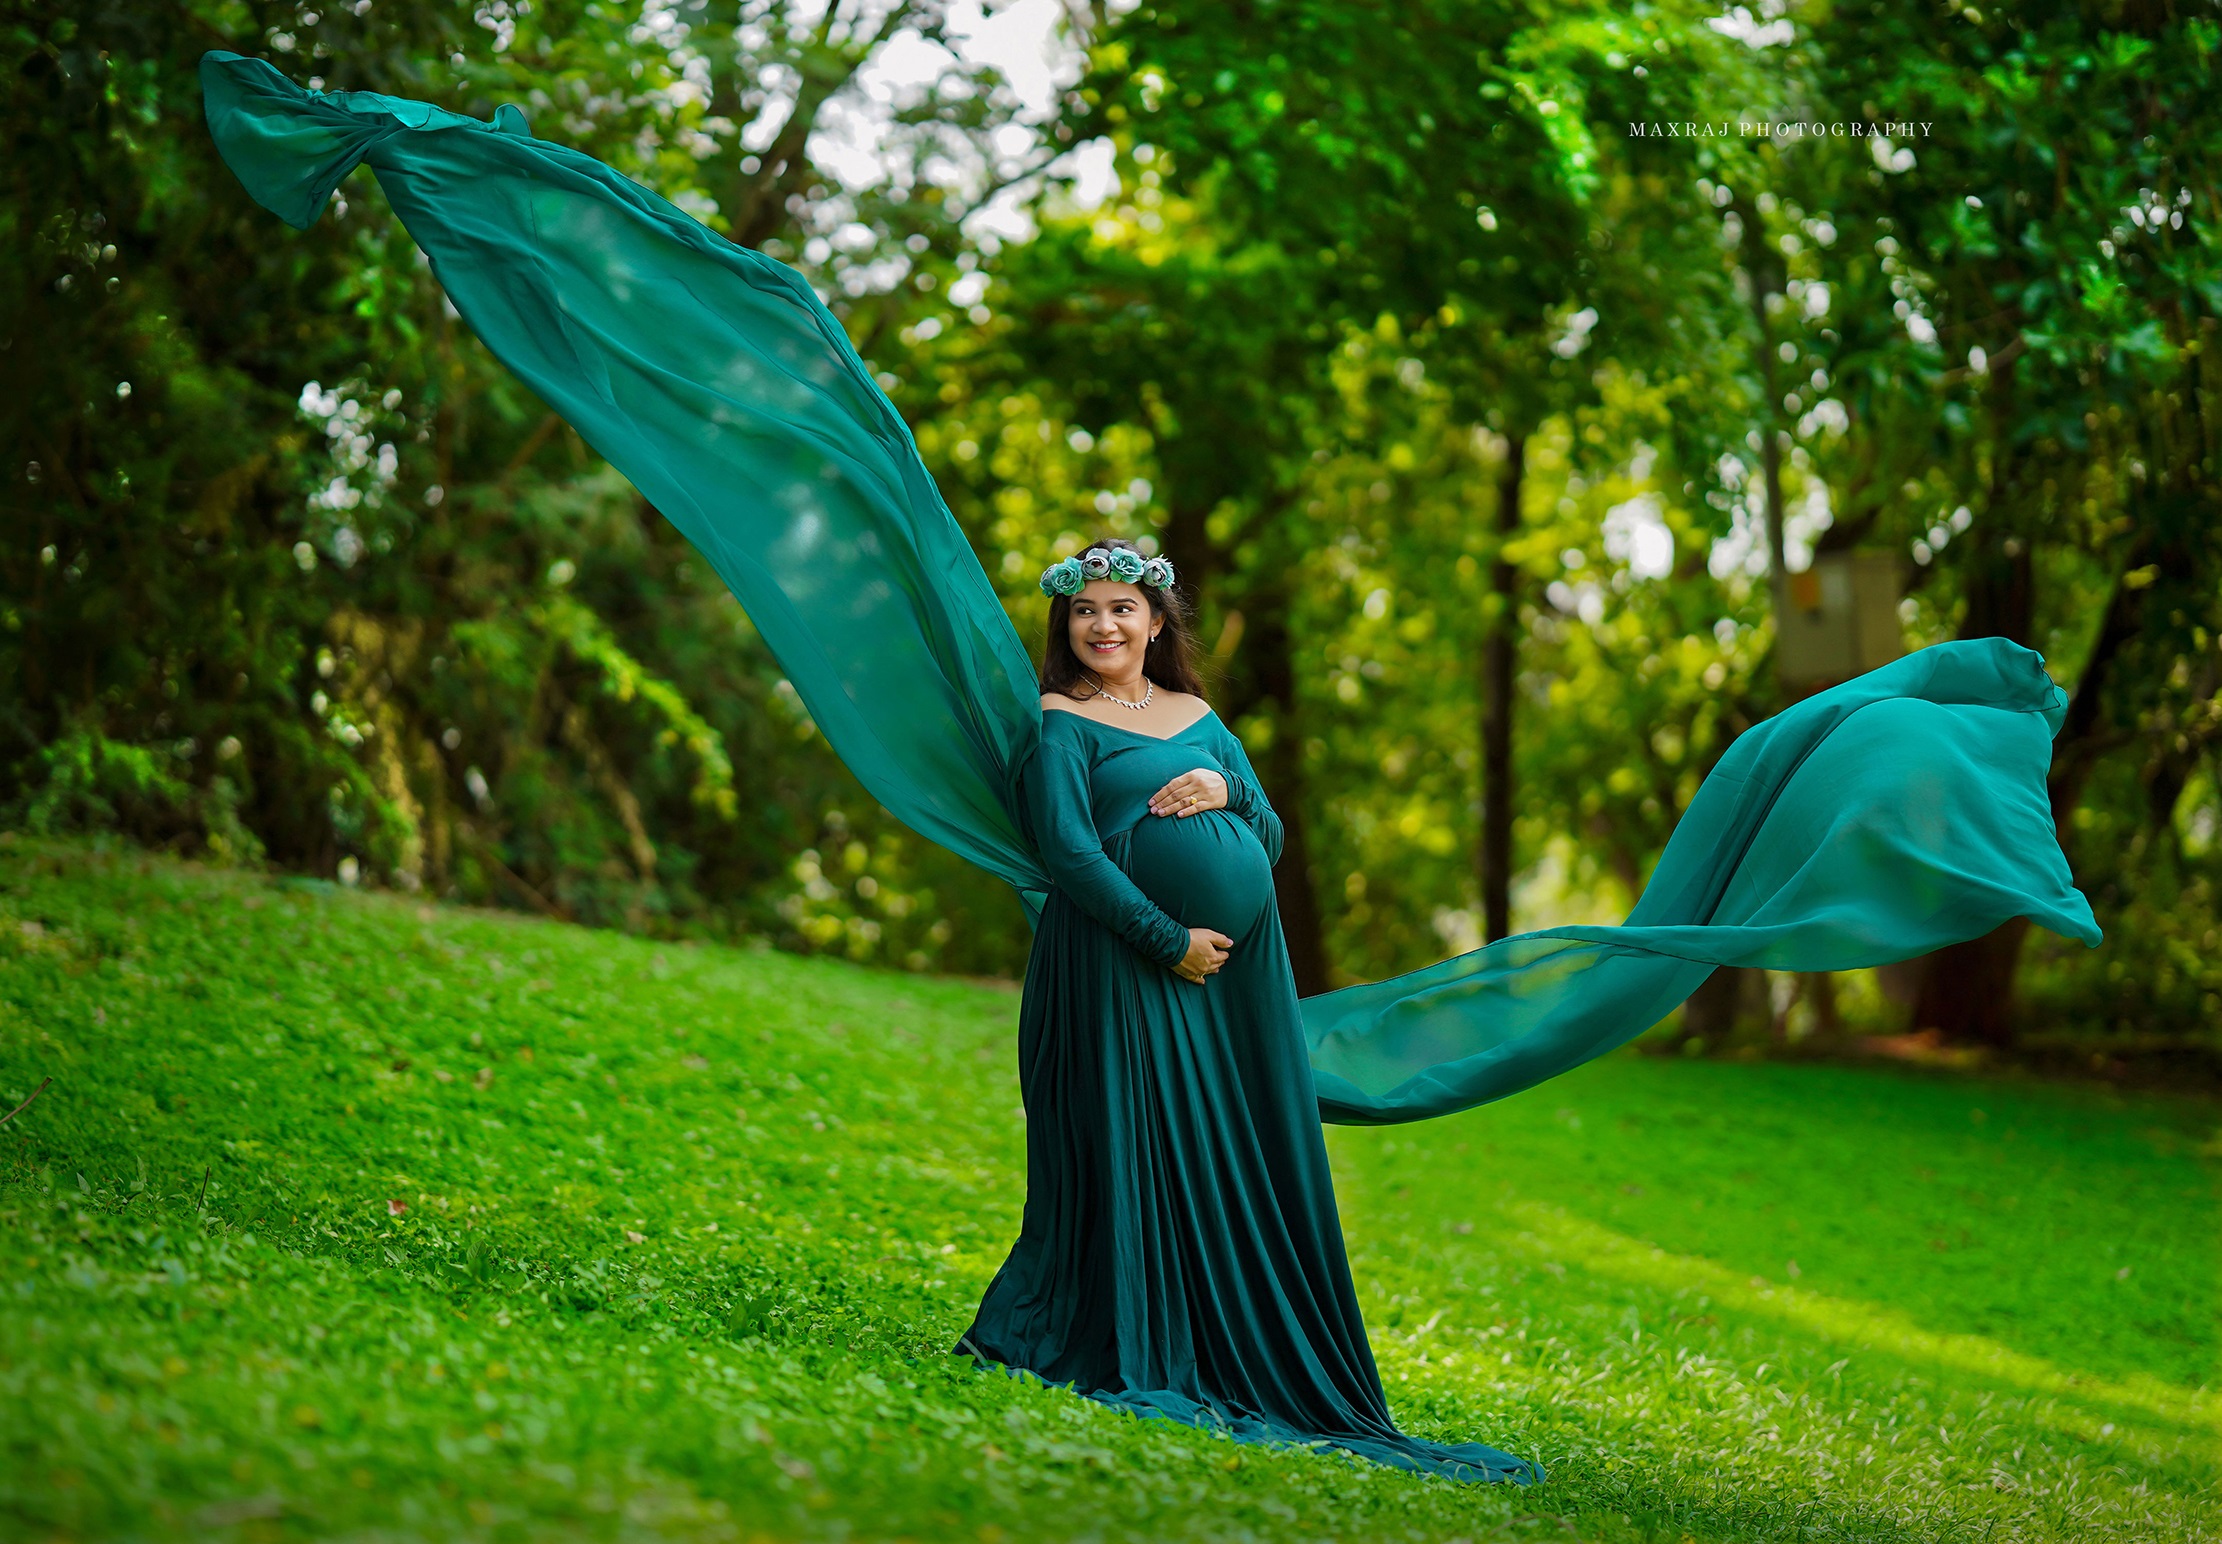 maternity photographer in pune, best maternity photographer in india, maternity photoshoot in pune in green flying gown